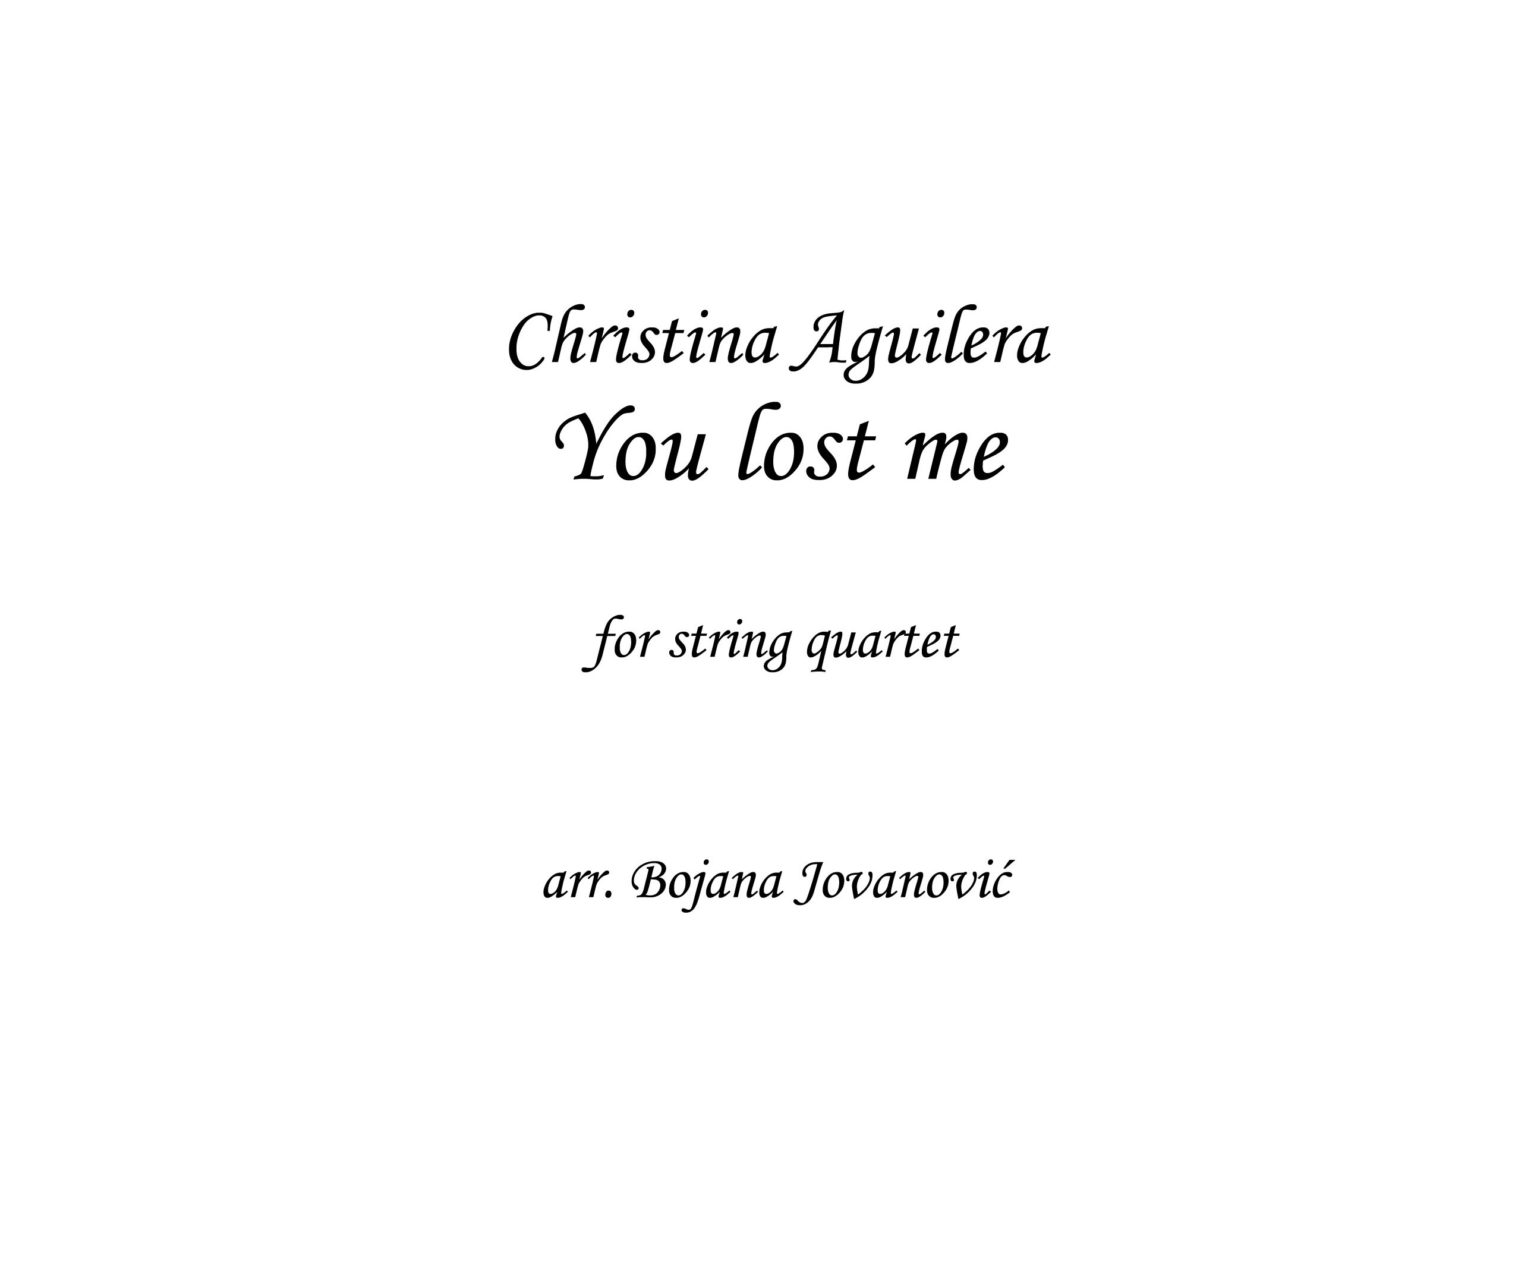 Lost on you текст перевод. You Lost me Christina Aguilera текст. Christina Aguilera you Lost me Ноты. Агилера you Lost me Ноты для фортепиано.